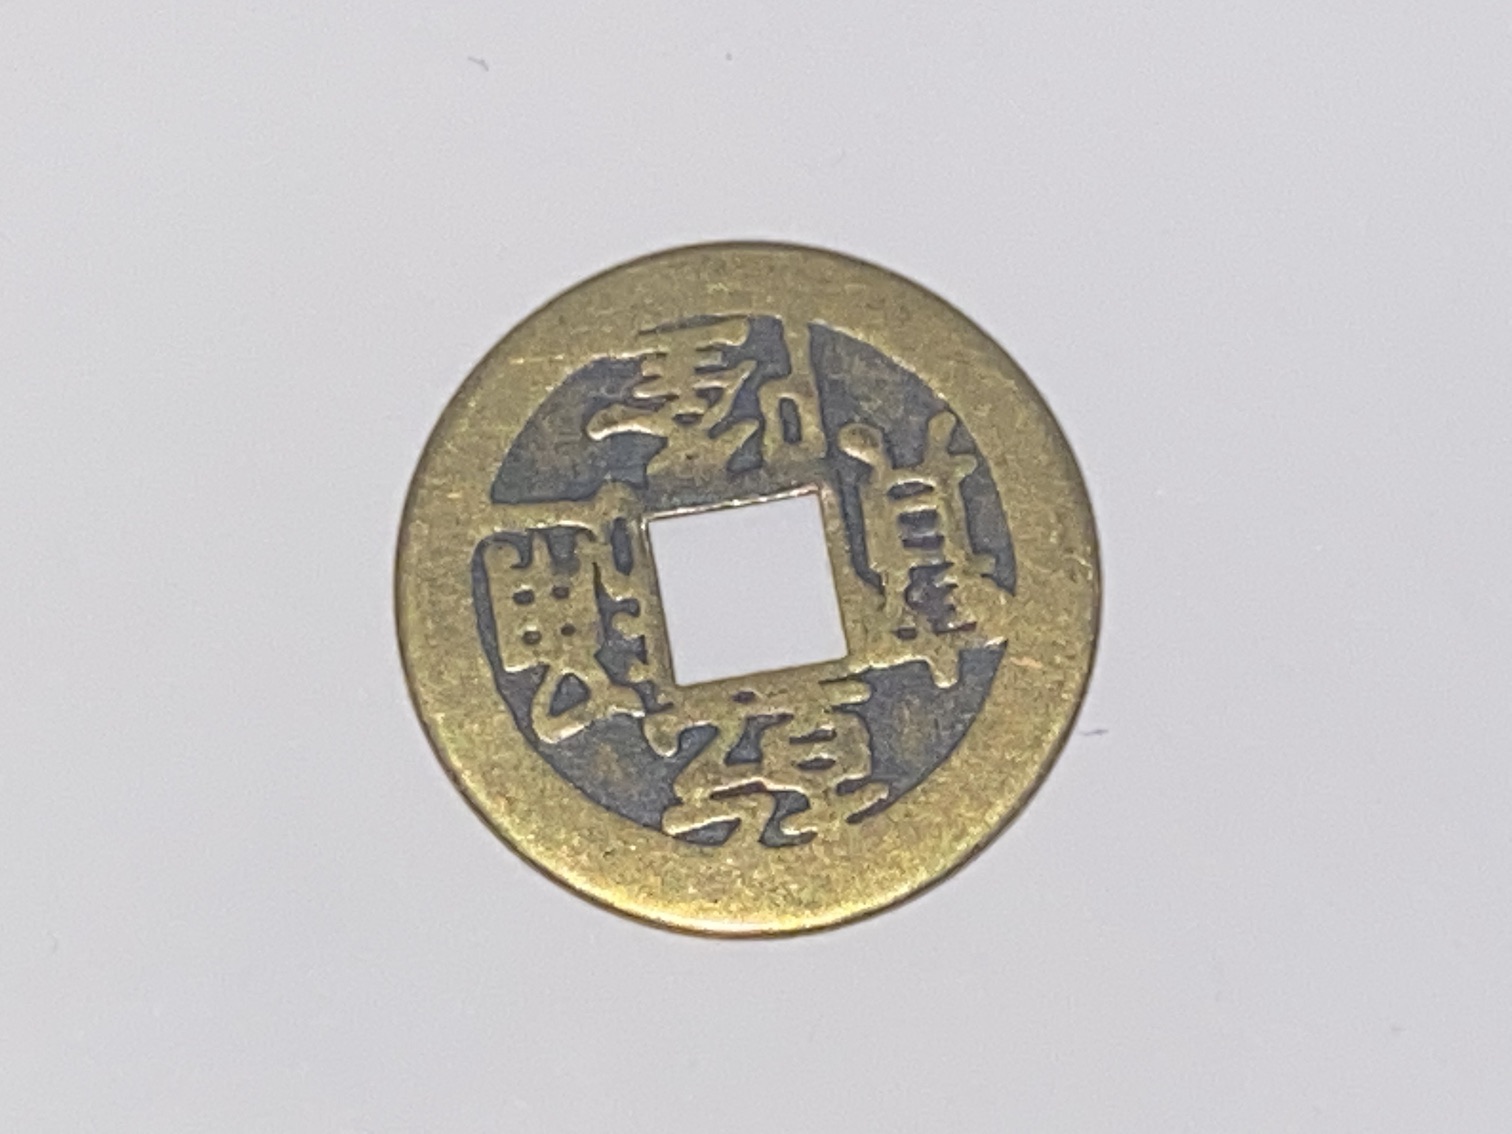 What is this Asian coin? It was shipped to me from an unknown person ...